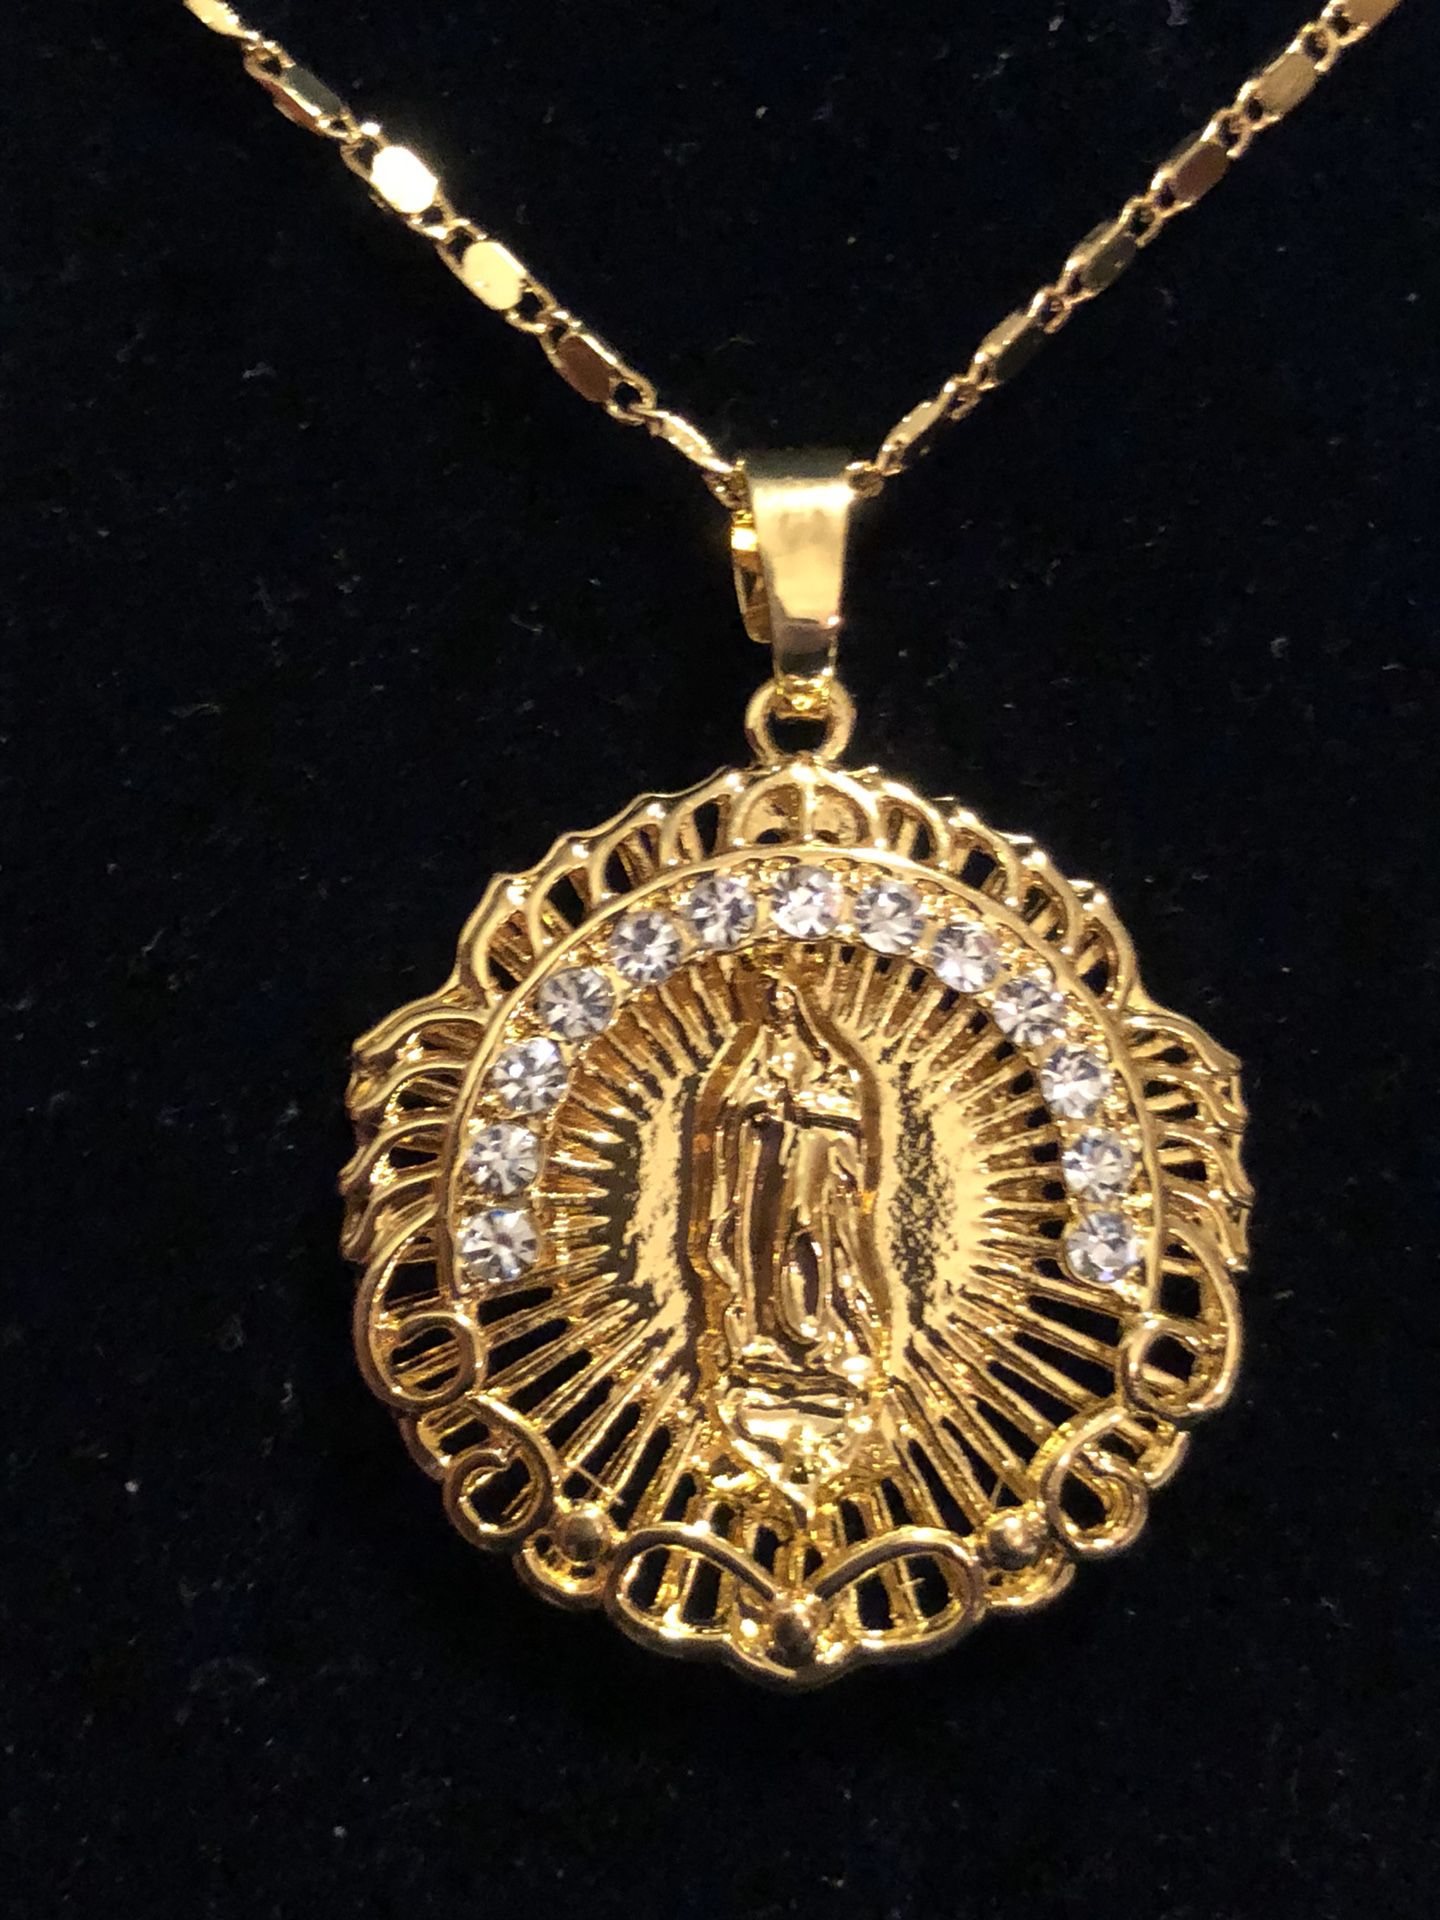 Virgin Mary Pendant Charm Necklace Chain